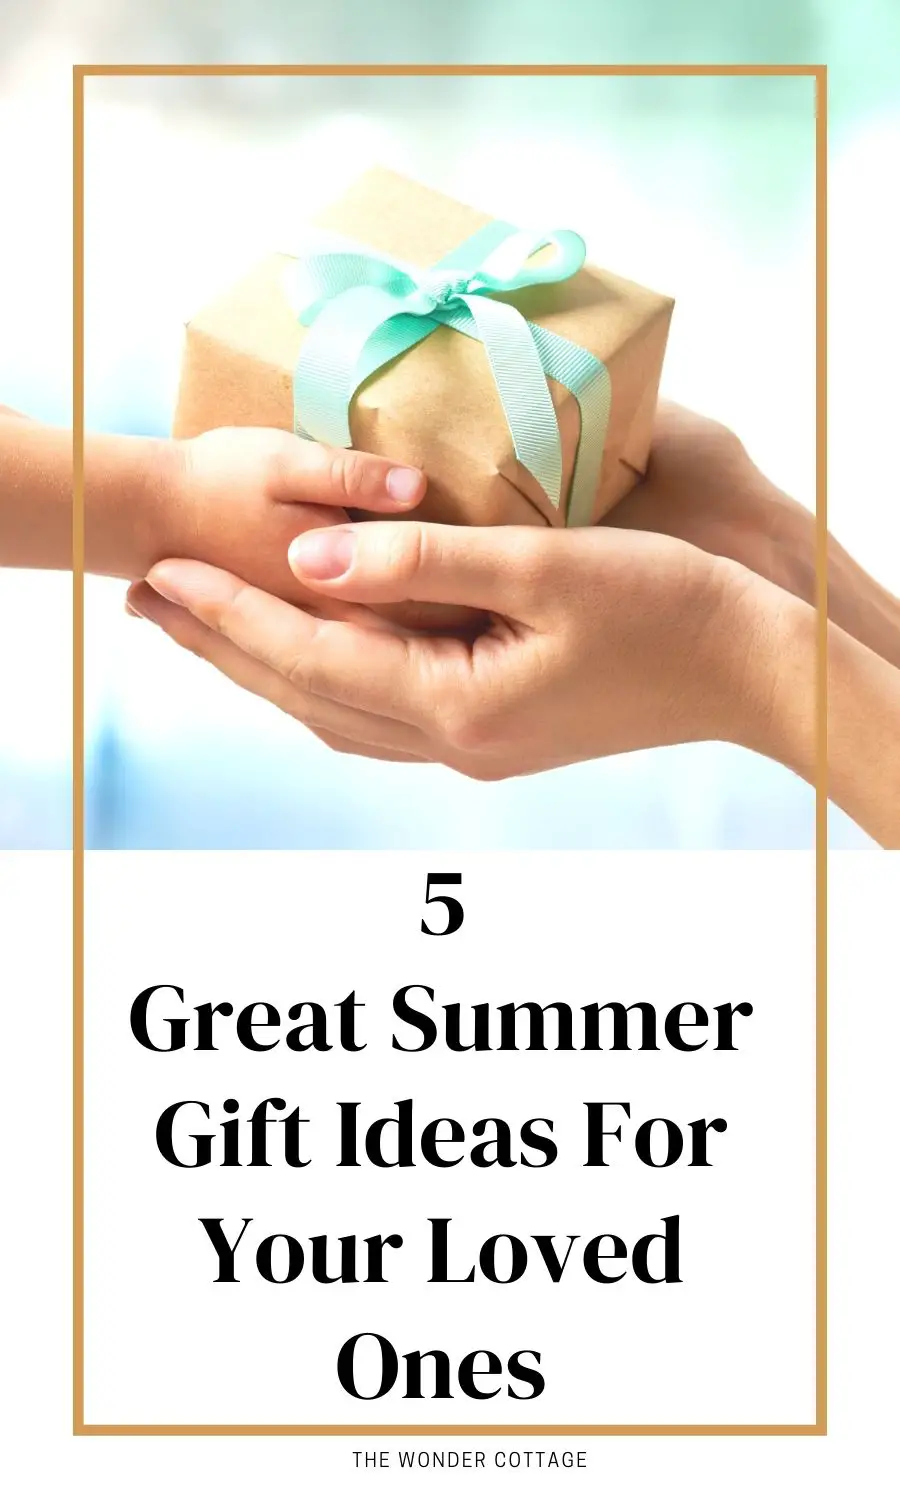 Some Great Summer Gift Ideas For Your Loved Ones